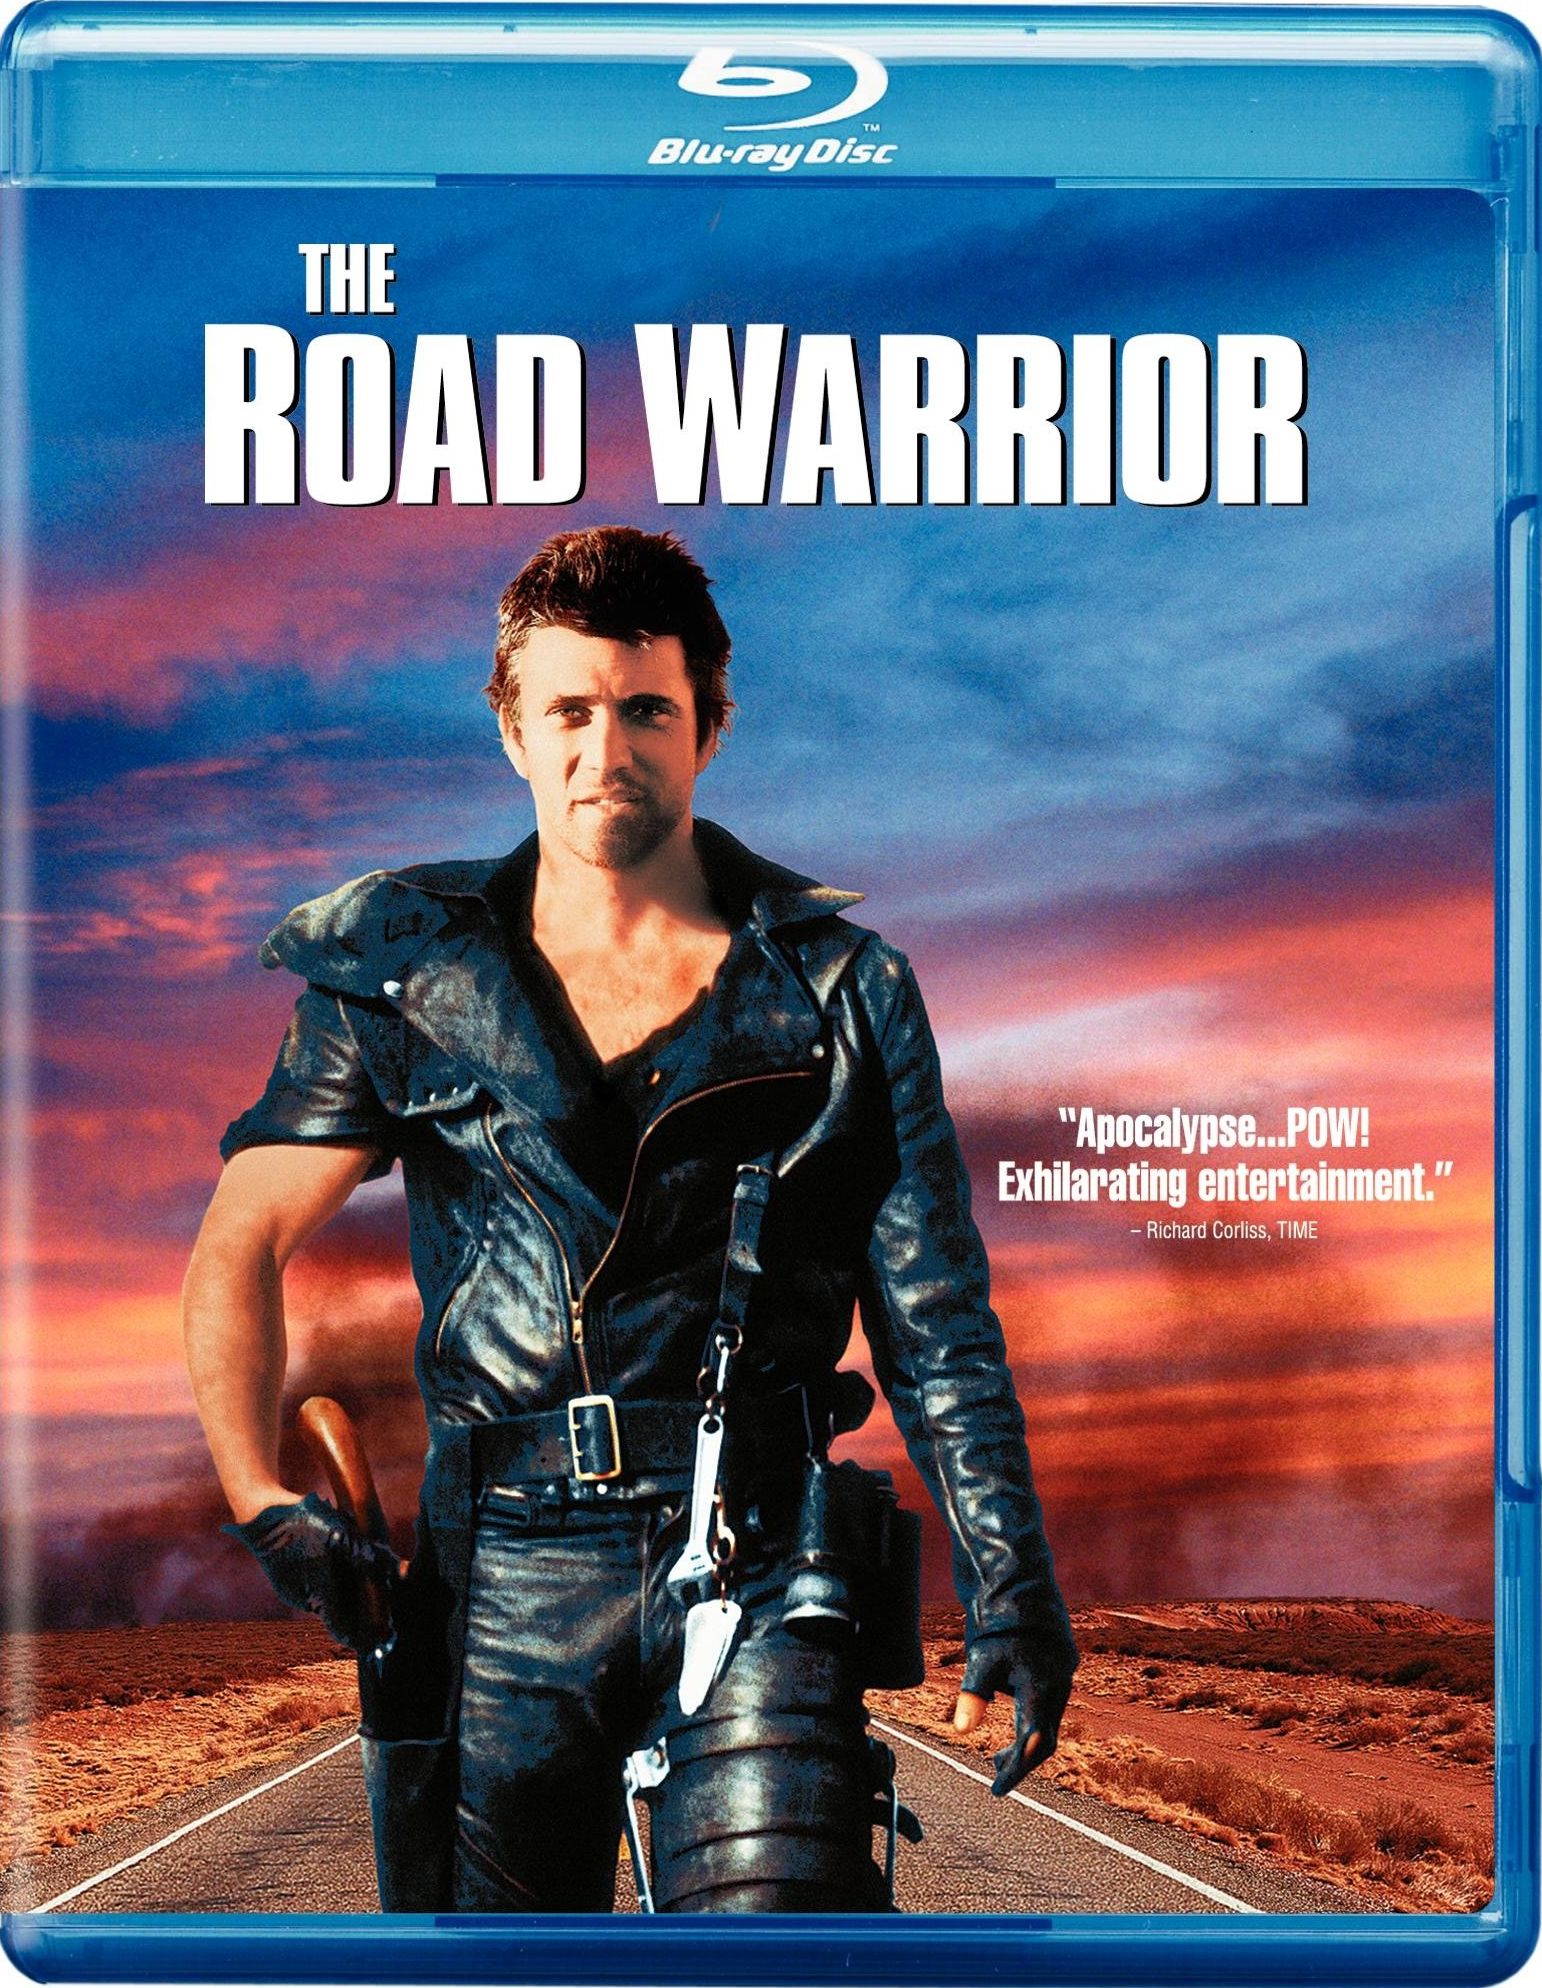 the-road-warrior-blu-ray-cover-07.jpg